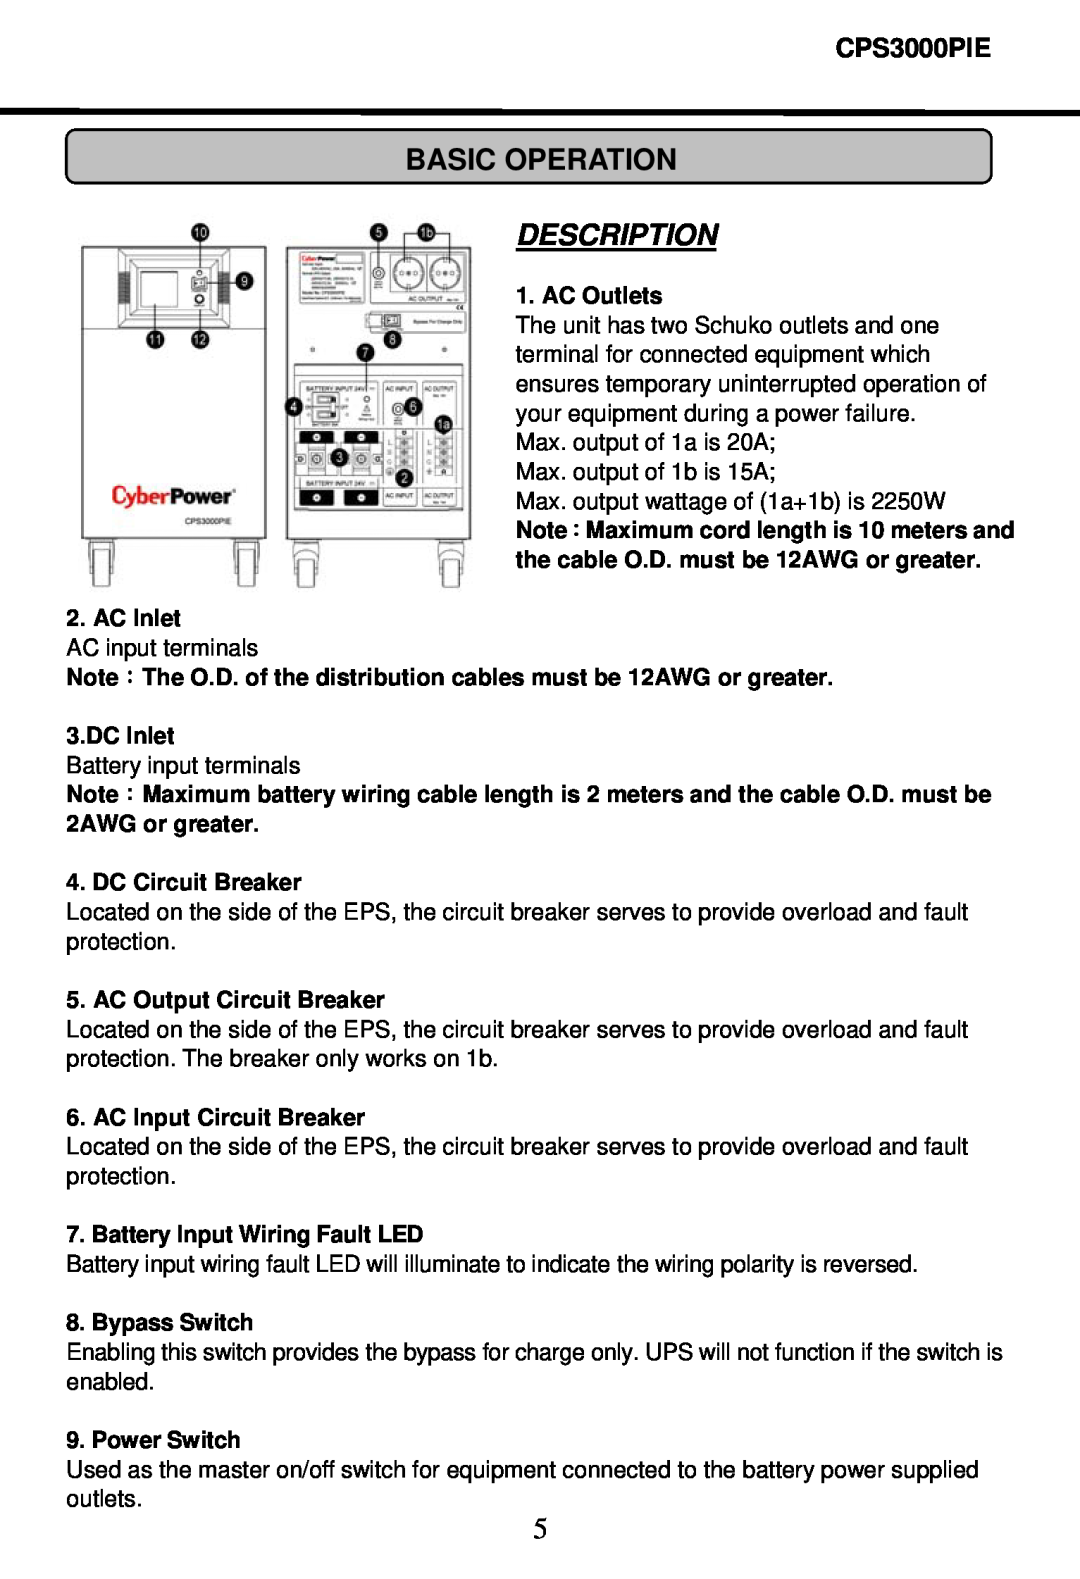 CyberPower Systems CPS3000PIE Description, AC Outlets, AC Inlet, DC Inlet, DC Circuit Breaker, AC Output Circuit Breaker 